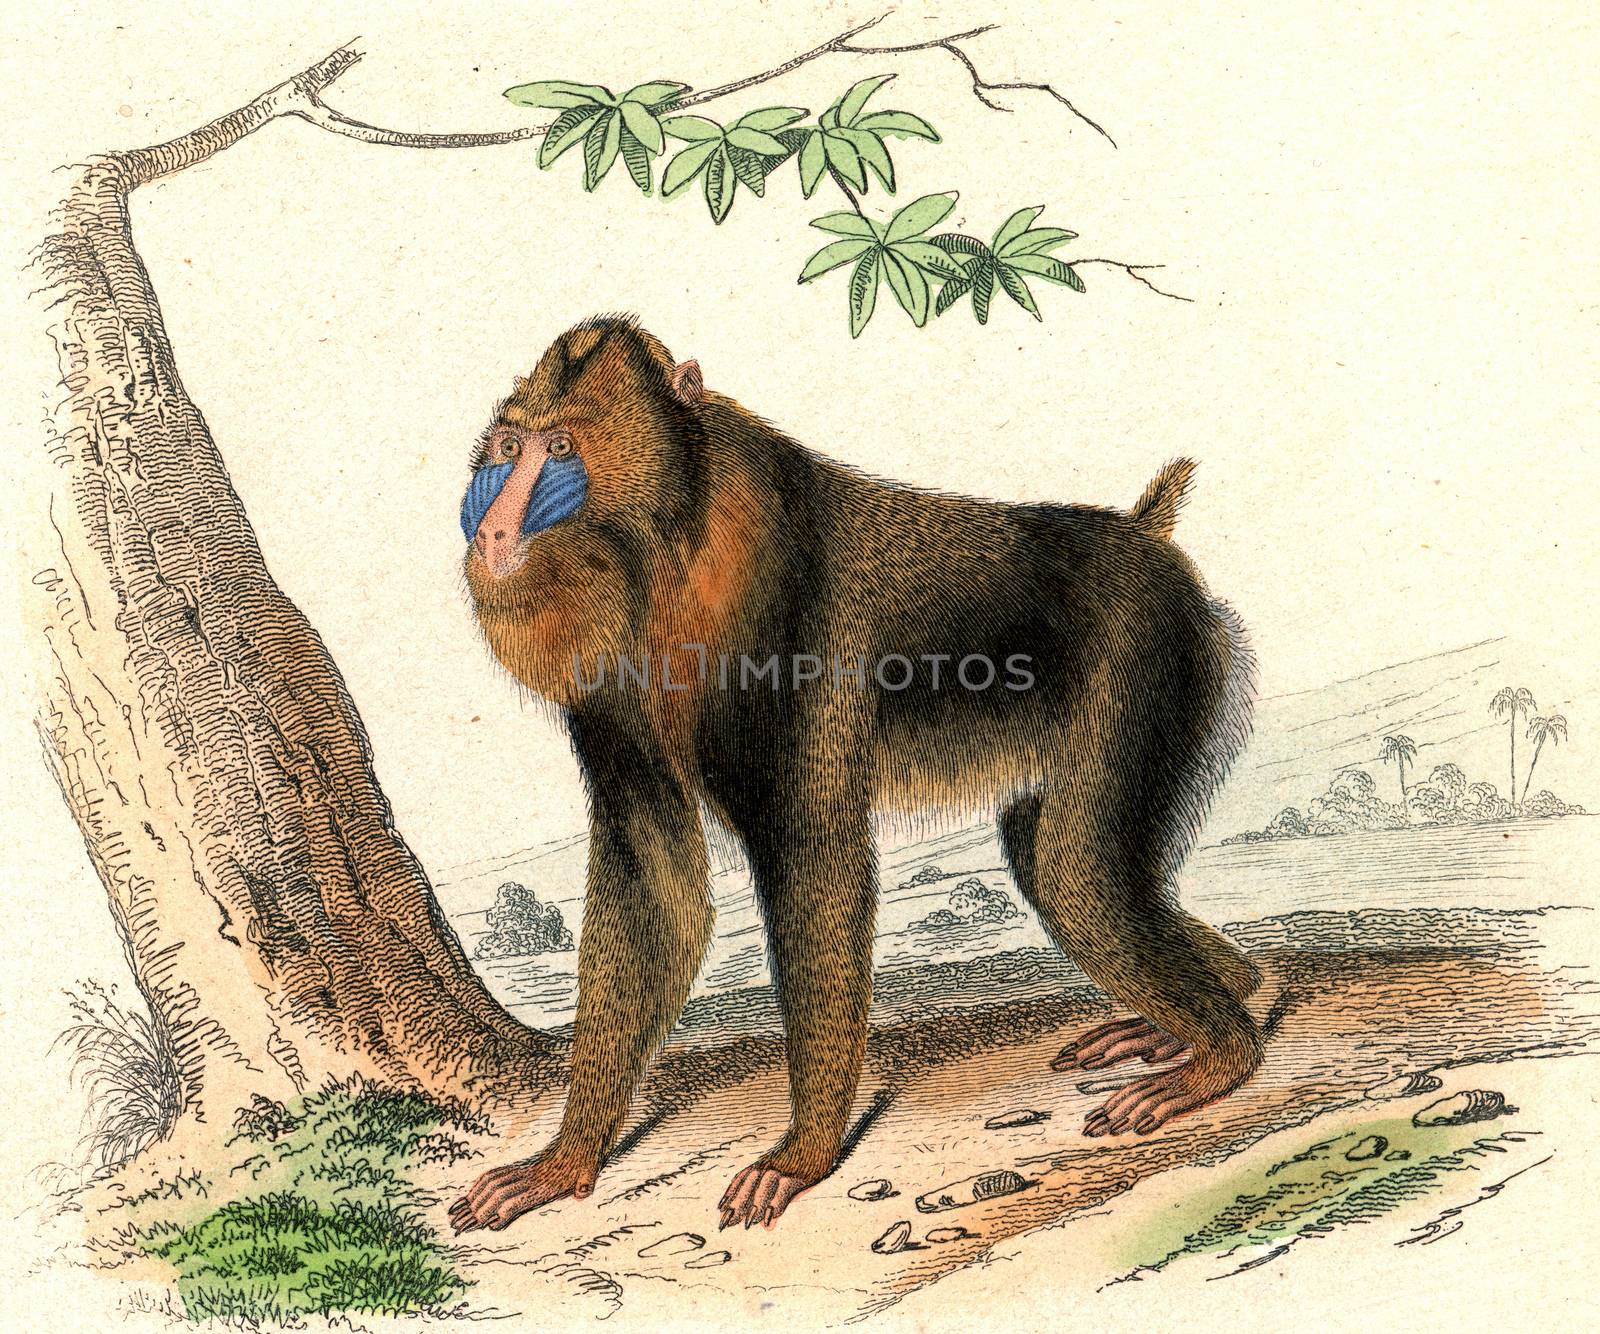 The Mandrill, vintage engraved illustration. From Buffon Complete Work.
